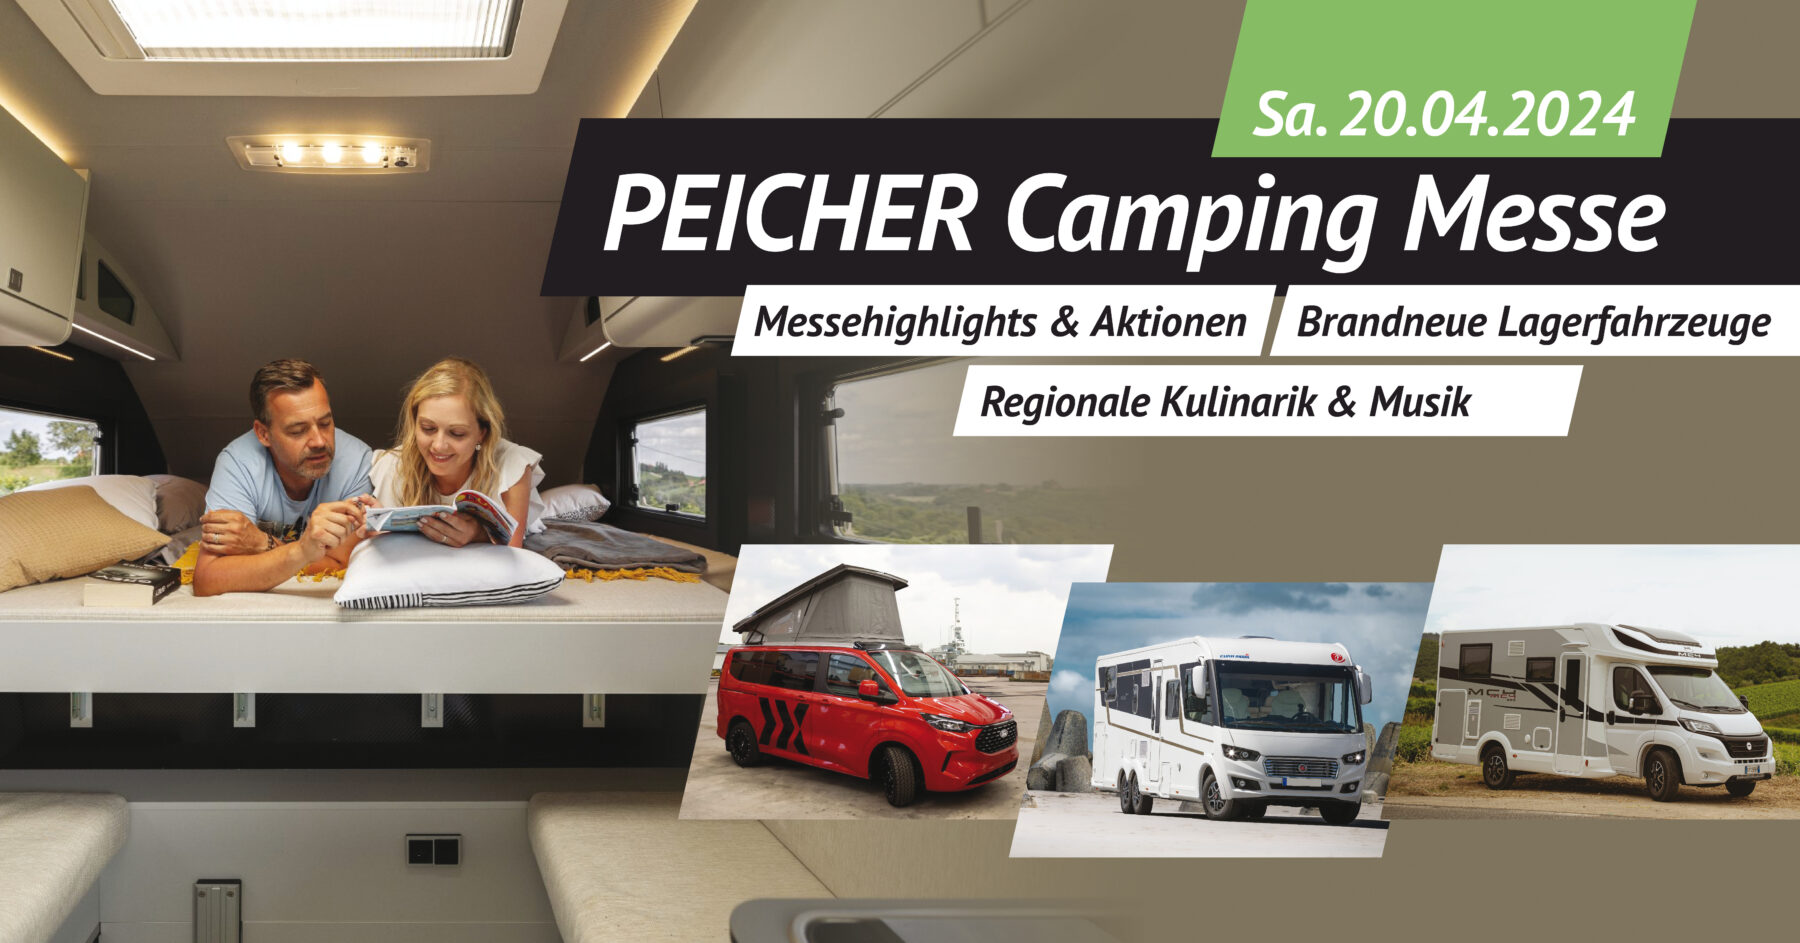 PEICHER Camping Messe 2024